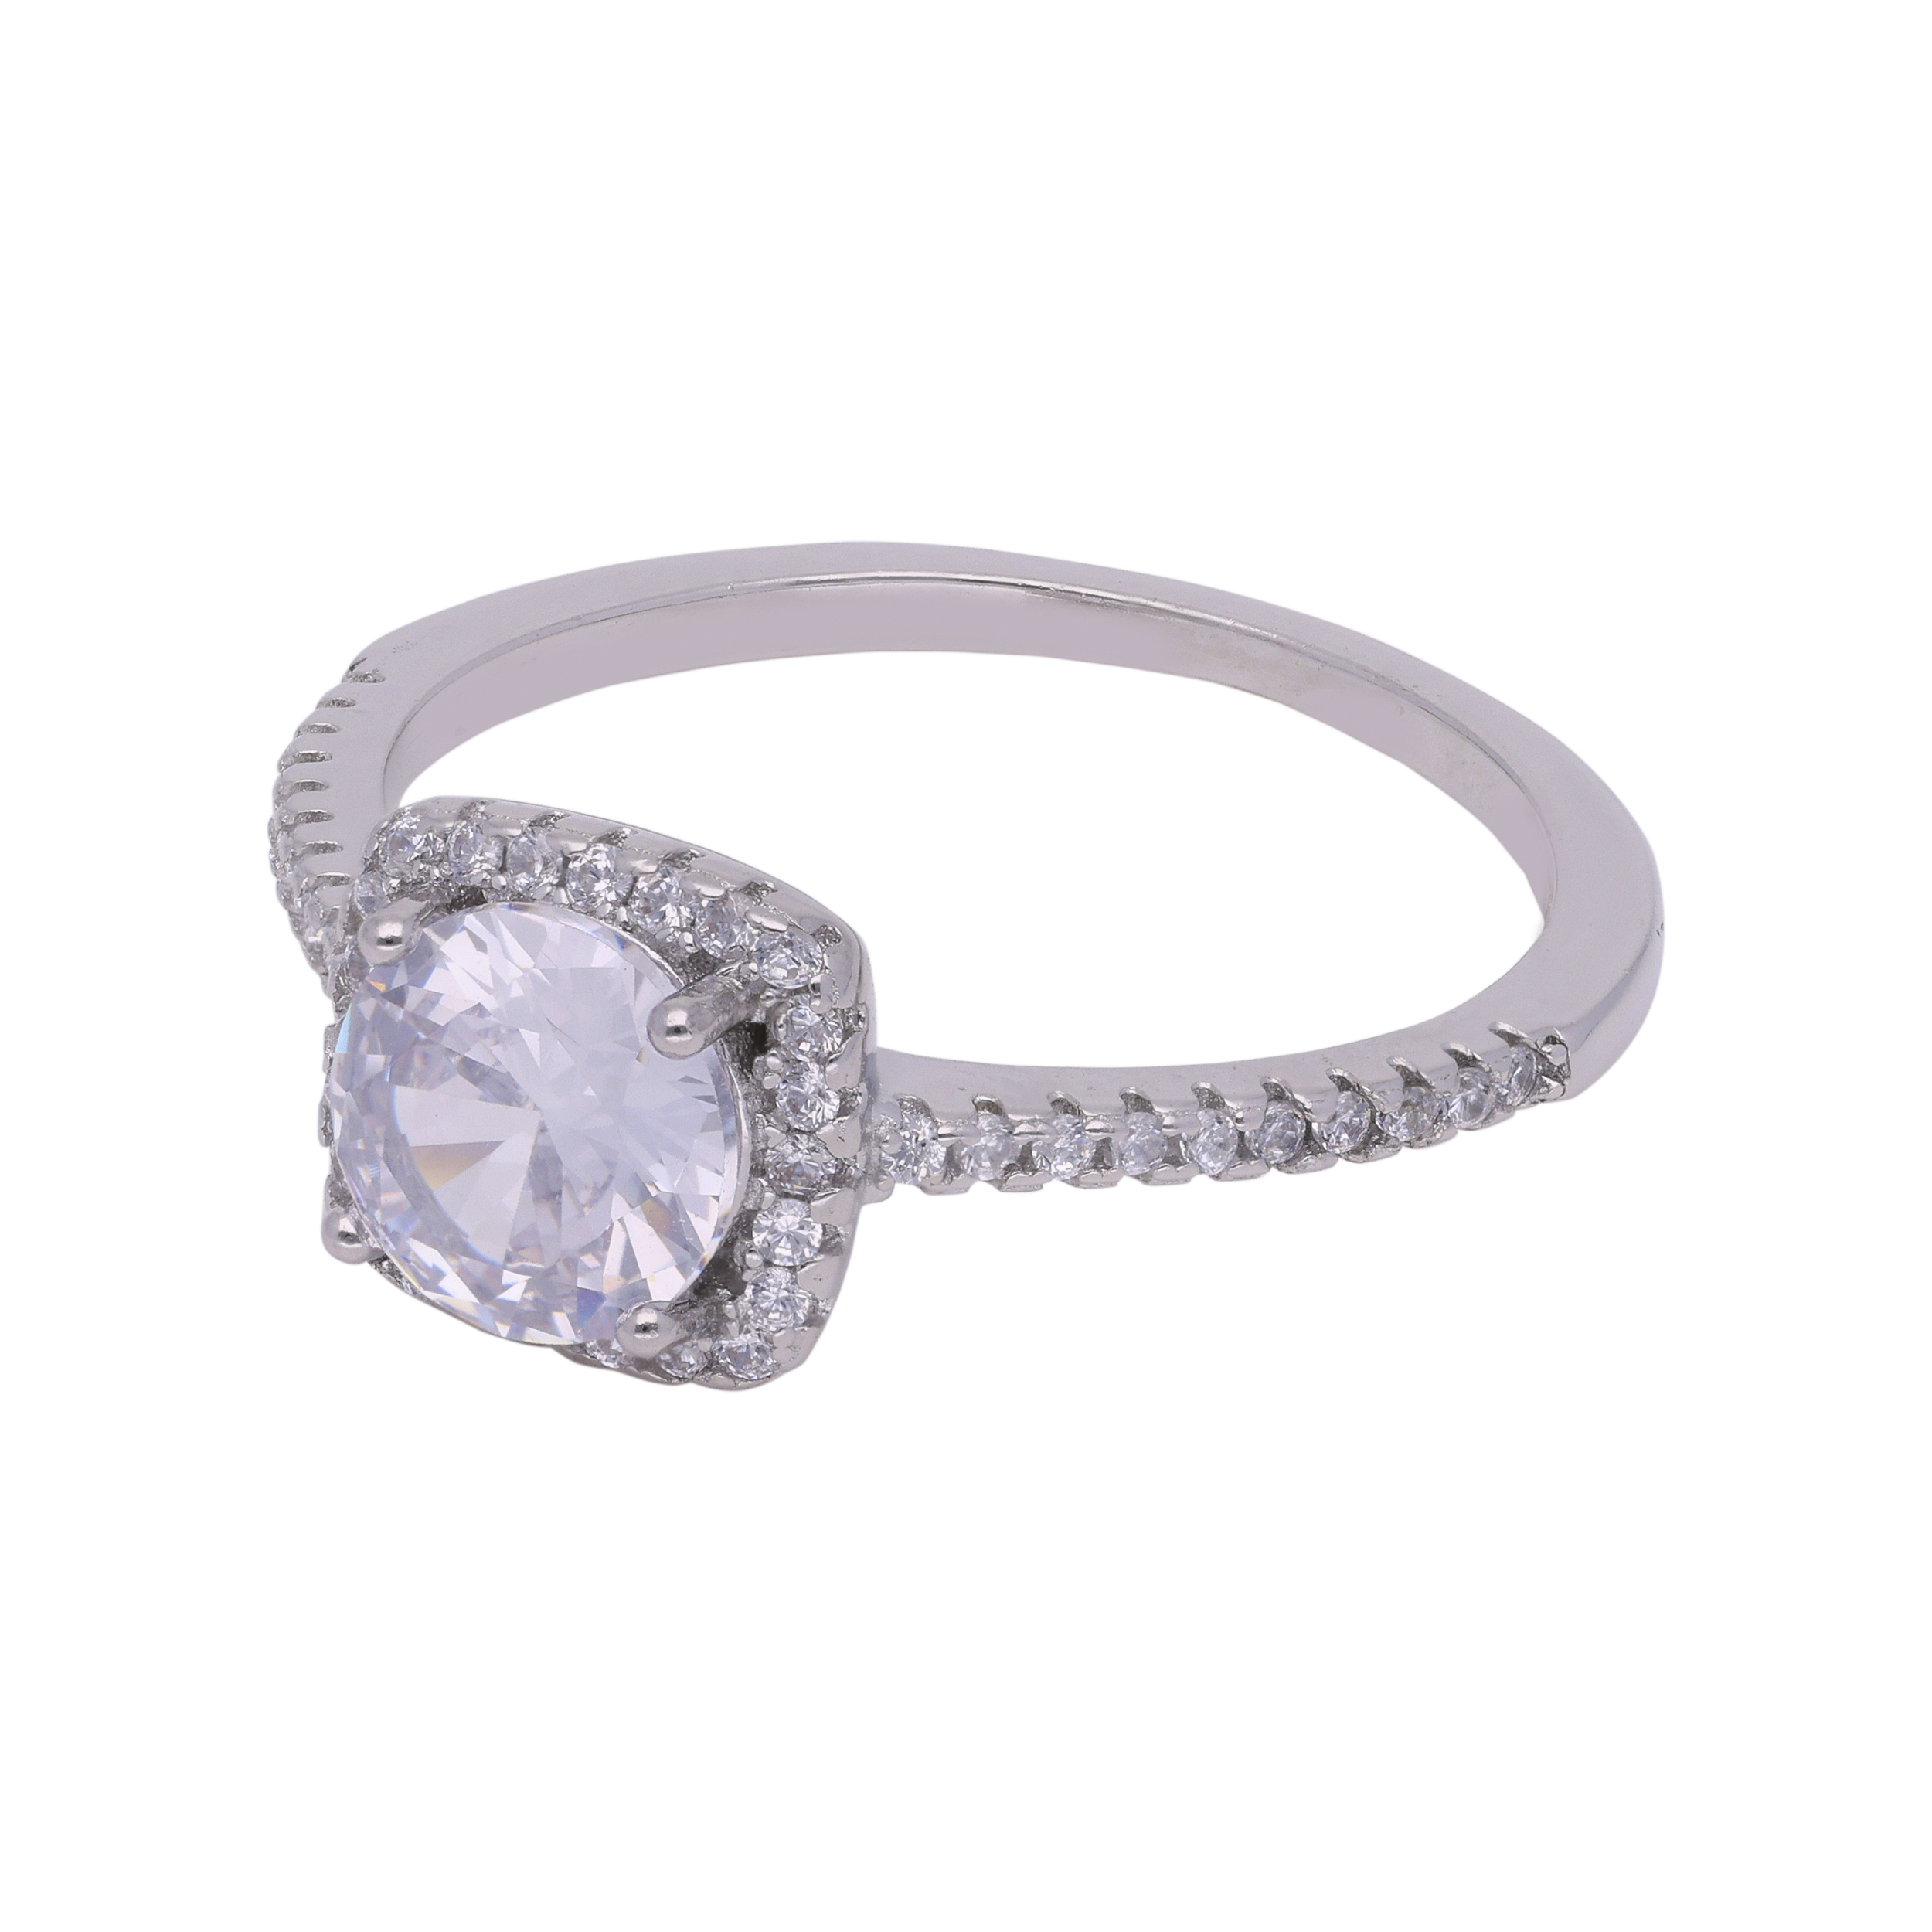 Timeless Sparkle: Sterling Silver Solitaire Ring | SKU : 0019890869, 0019890845